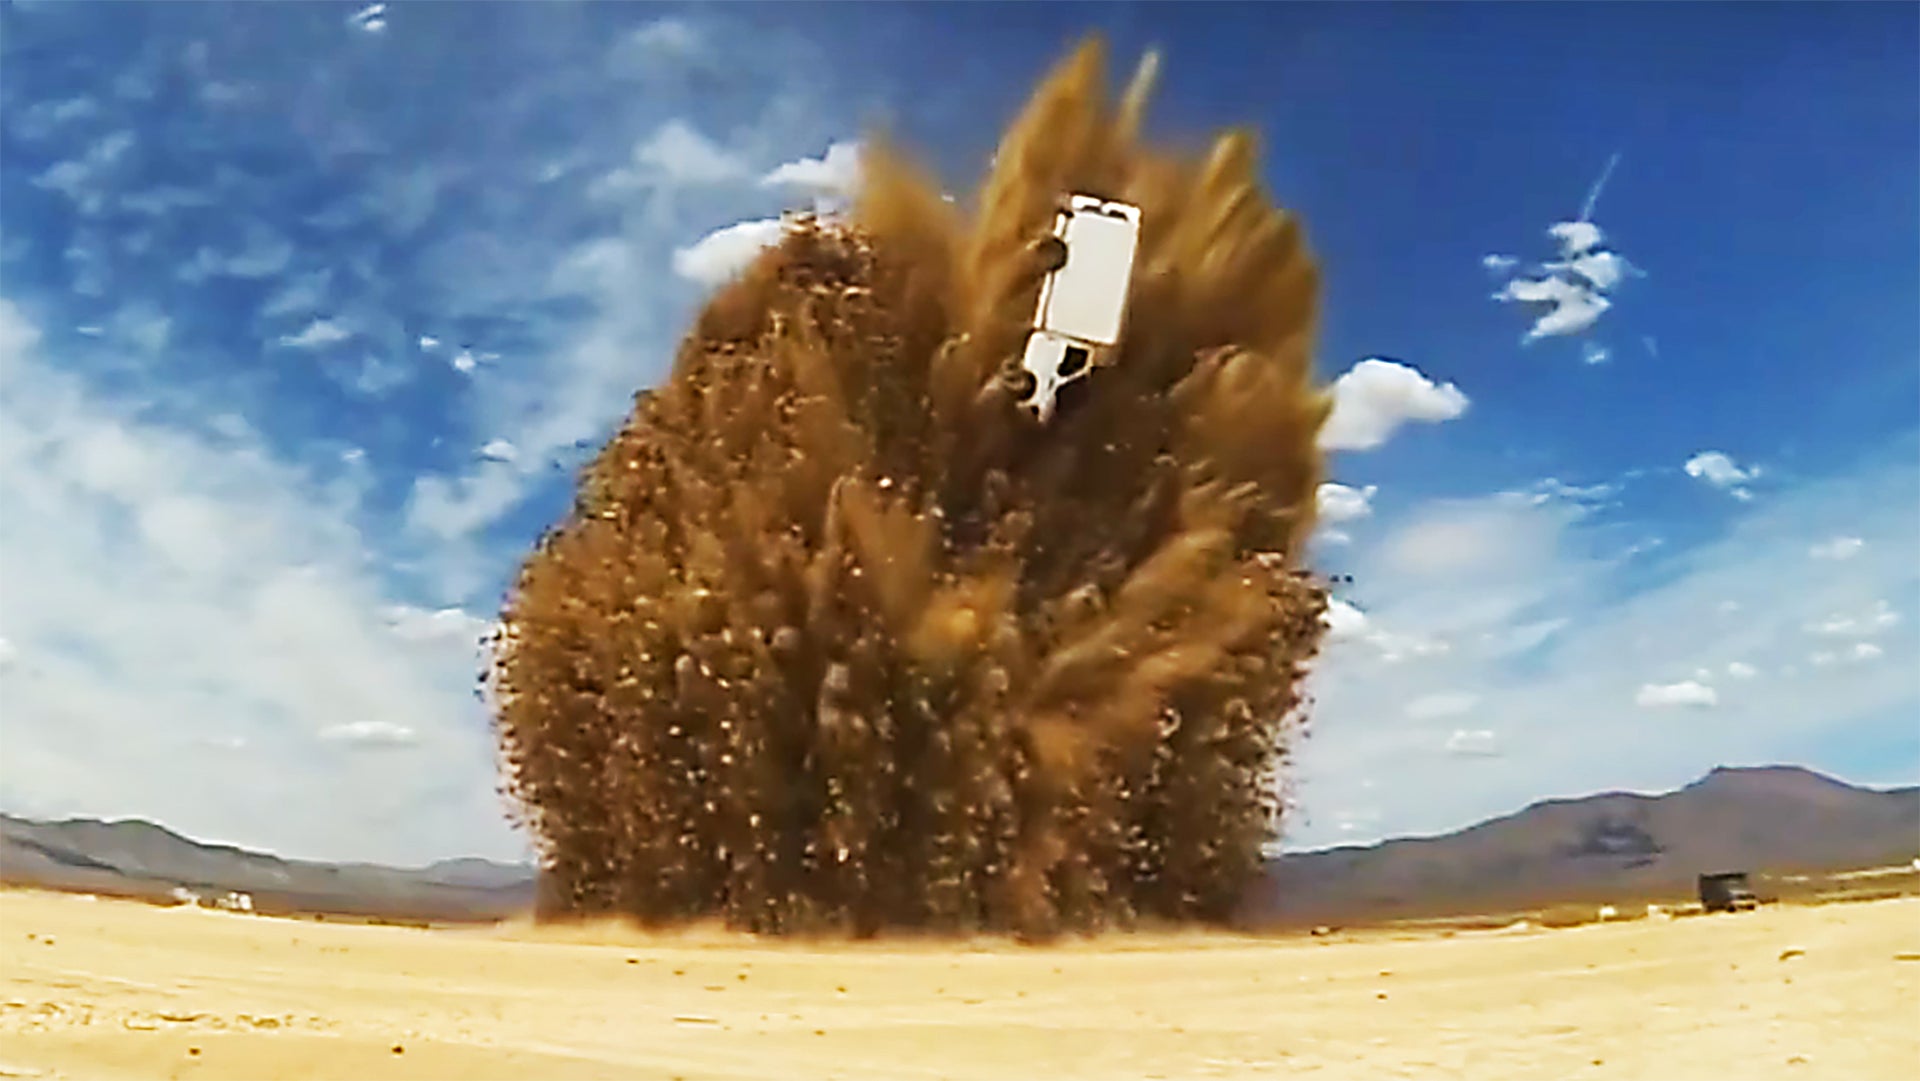 Watch The Navy Blow Up Pretty Much Everything On Its China Lake Weapons Range